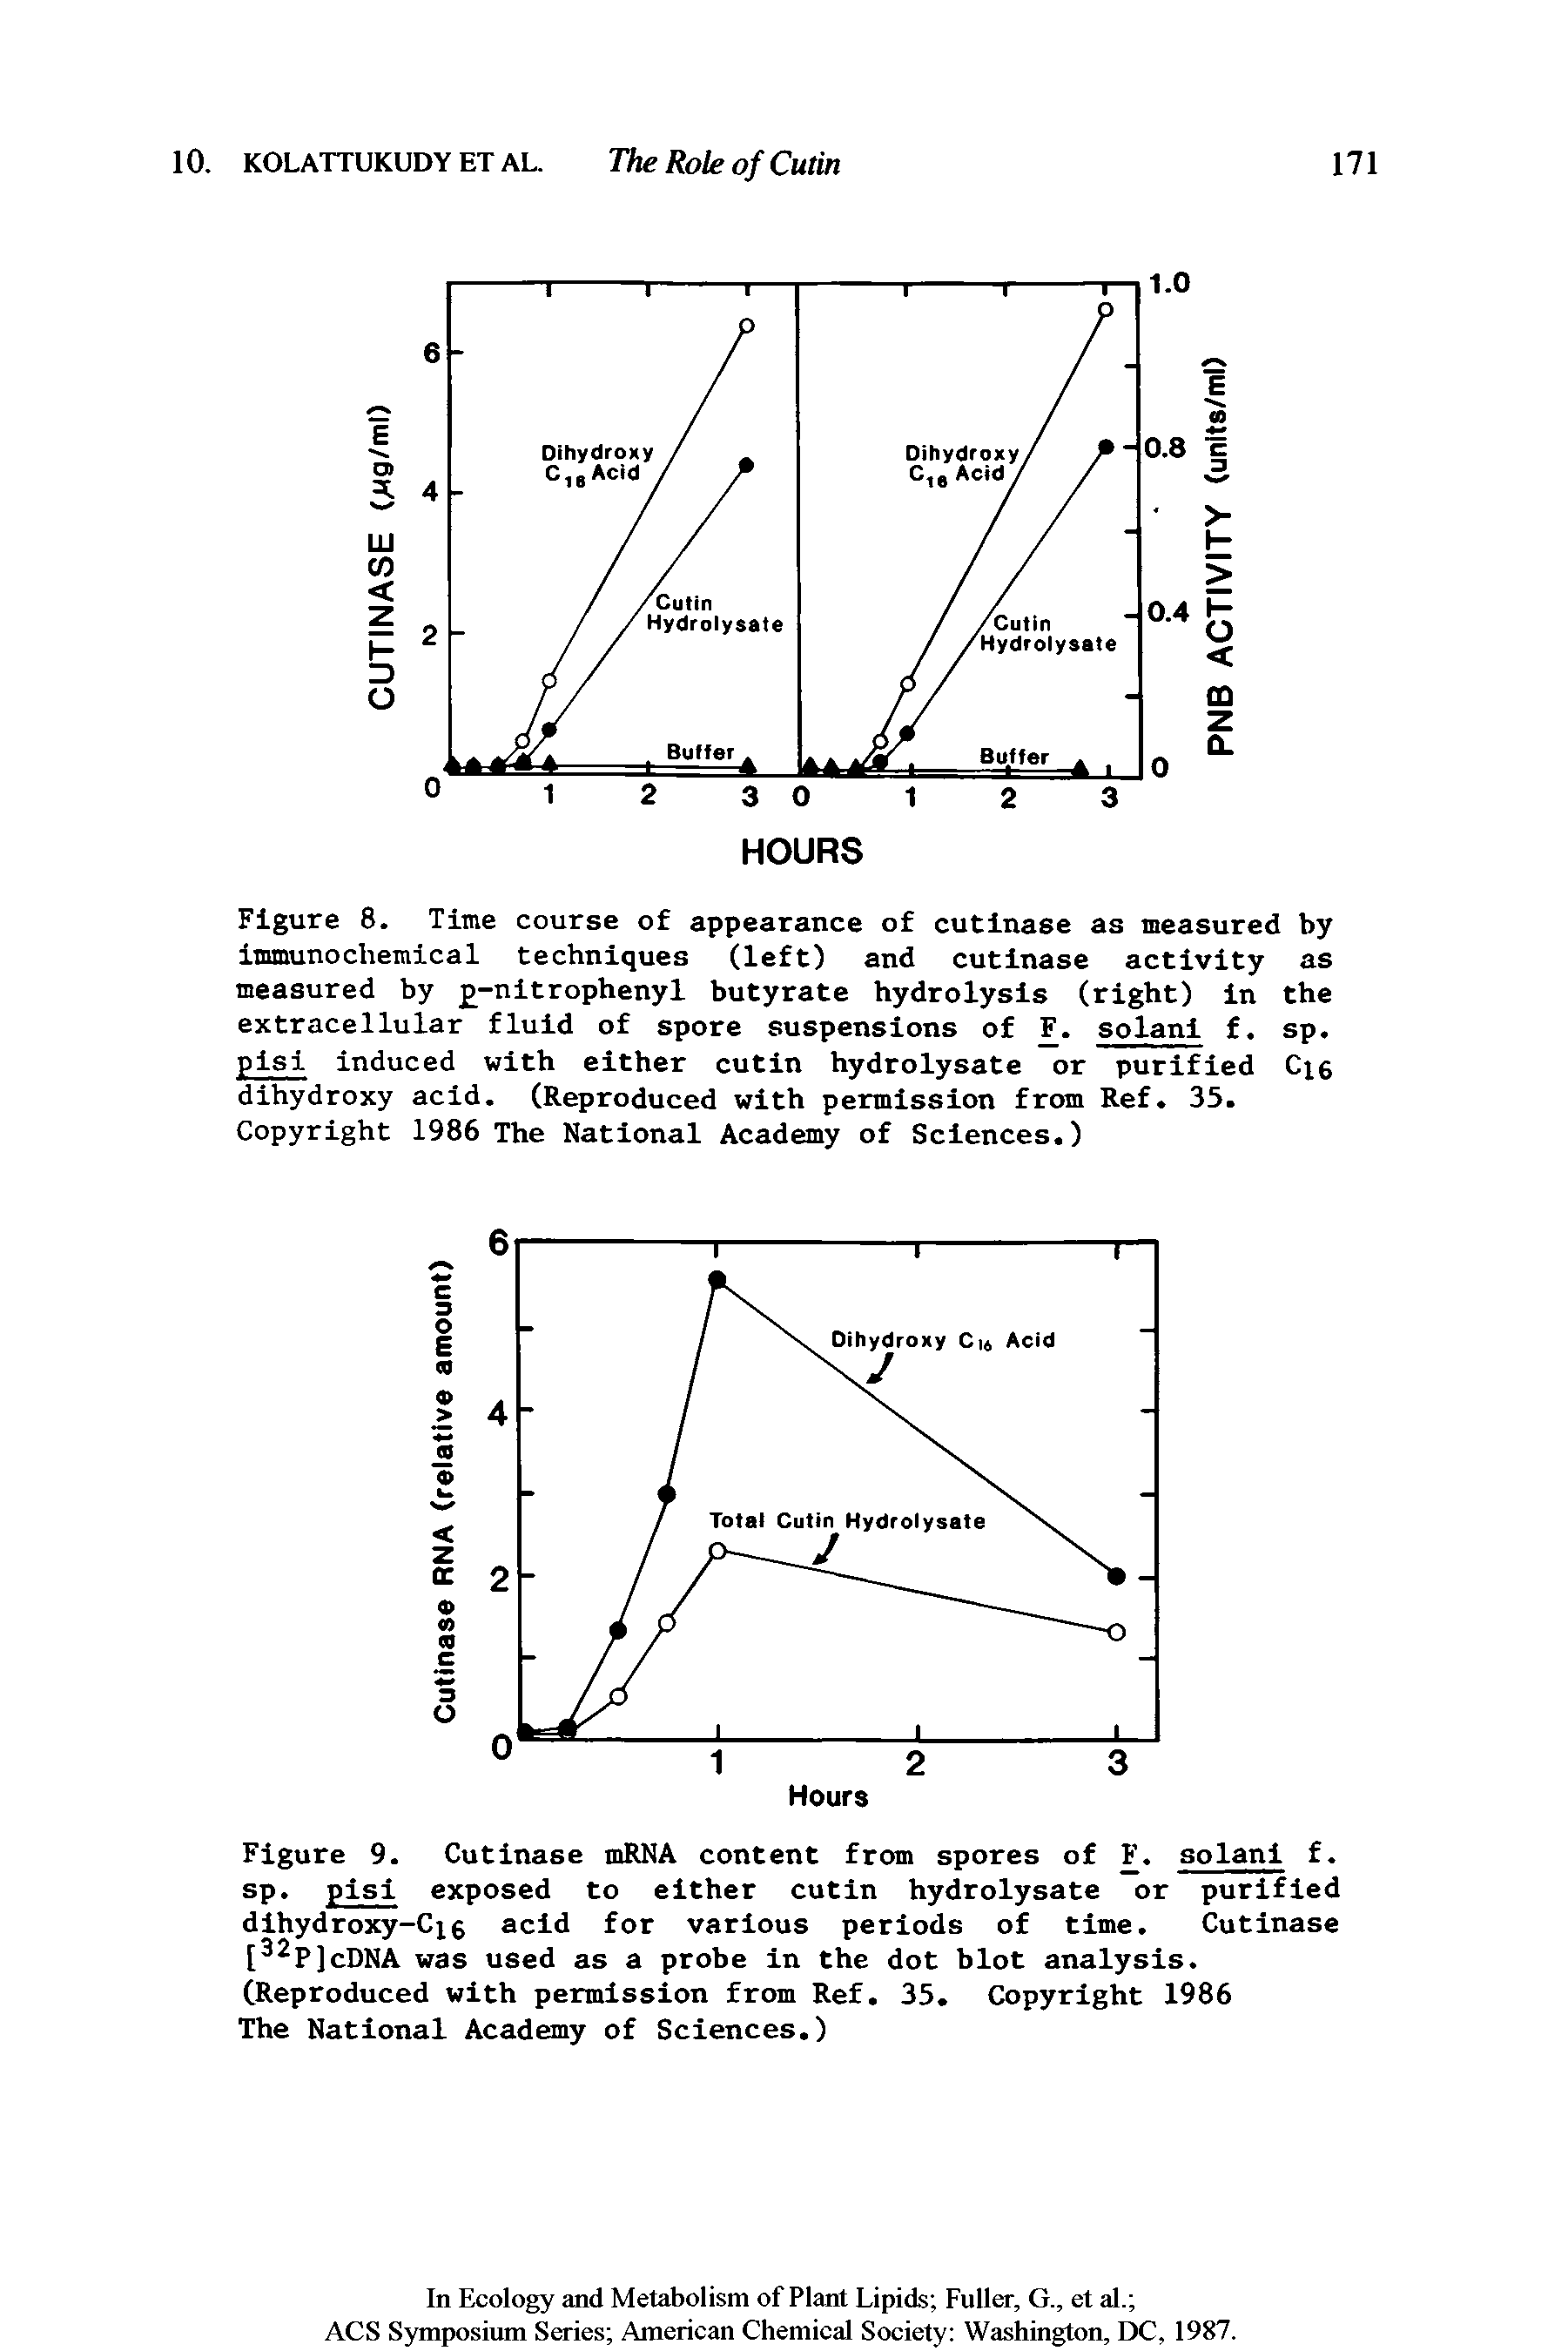 Figure 8. Time course of appearance of cutinase as measured by immunochemical techniques (left) and cutinase activity as measured by -nitrophenyl butyrate hydrolysis (right) in the extracellular fluid of spore suspensions of F. solani f. sp. pisi induced with either cutin hydrolysate or purified Cie dihydroxy acid. (Reproduced with permission from Ref. 35. Copyright 1986 The National Academy of Sciences.)...